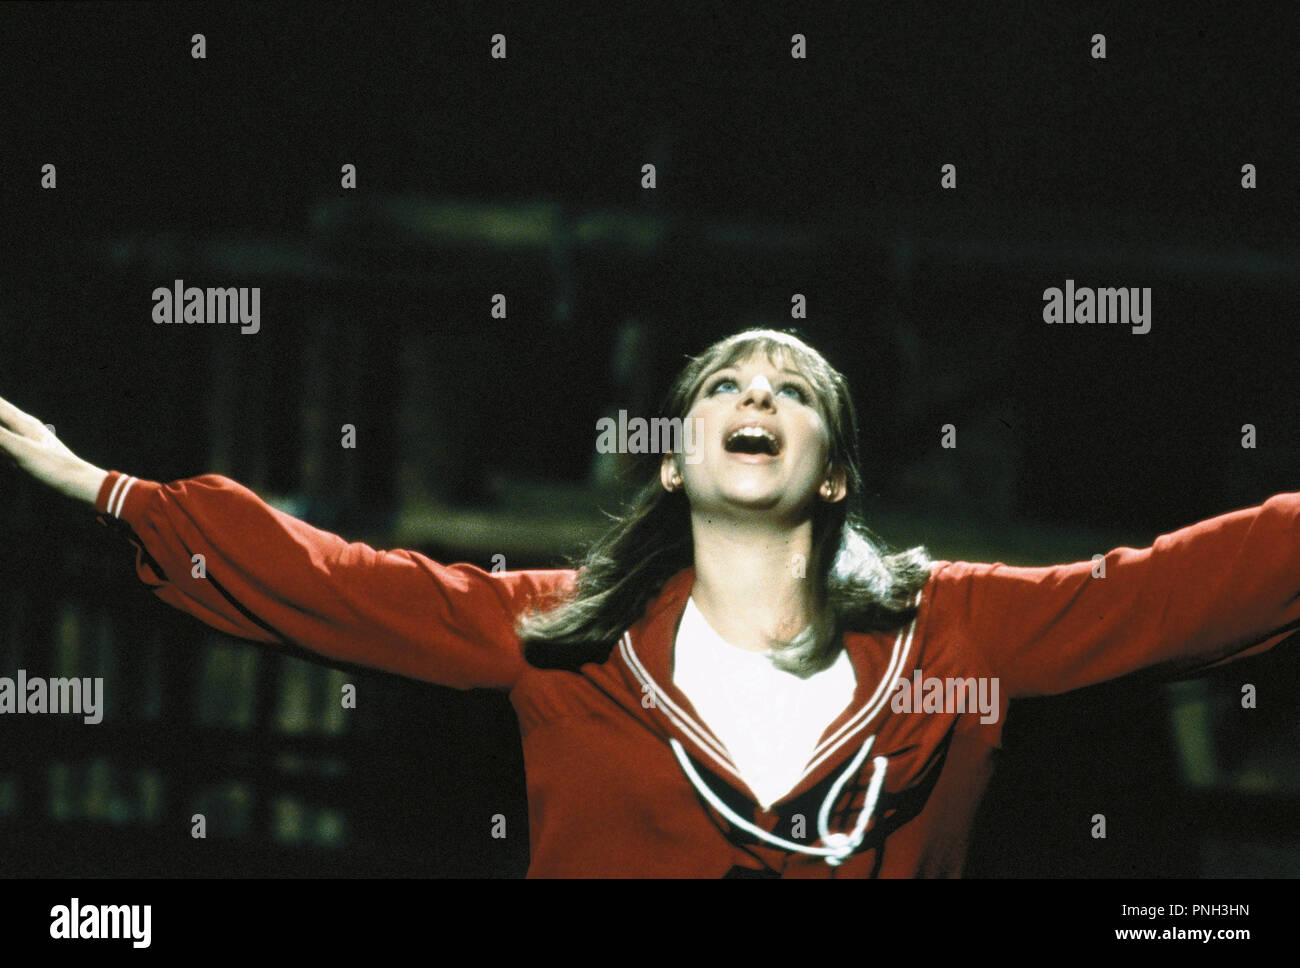 Original film title: FUNNY GIRL. English title: FUNNY GIRL. Year: 1968. Director: WILLIAM WYLER. Stars: BARBRA STREISAND. Credit: COLUMBIA PICTURES / Album Stock Photo